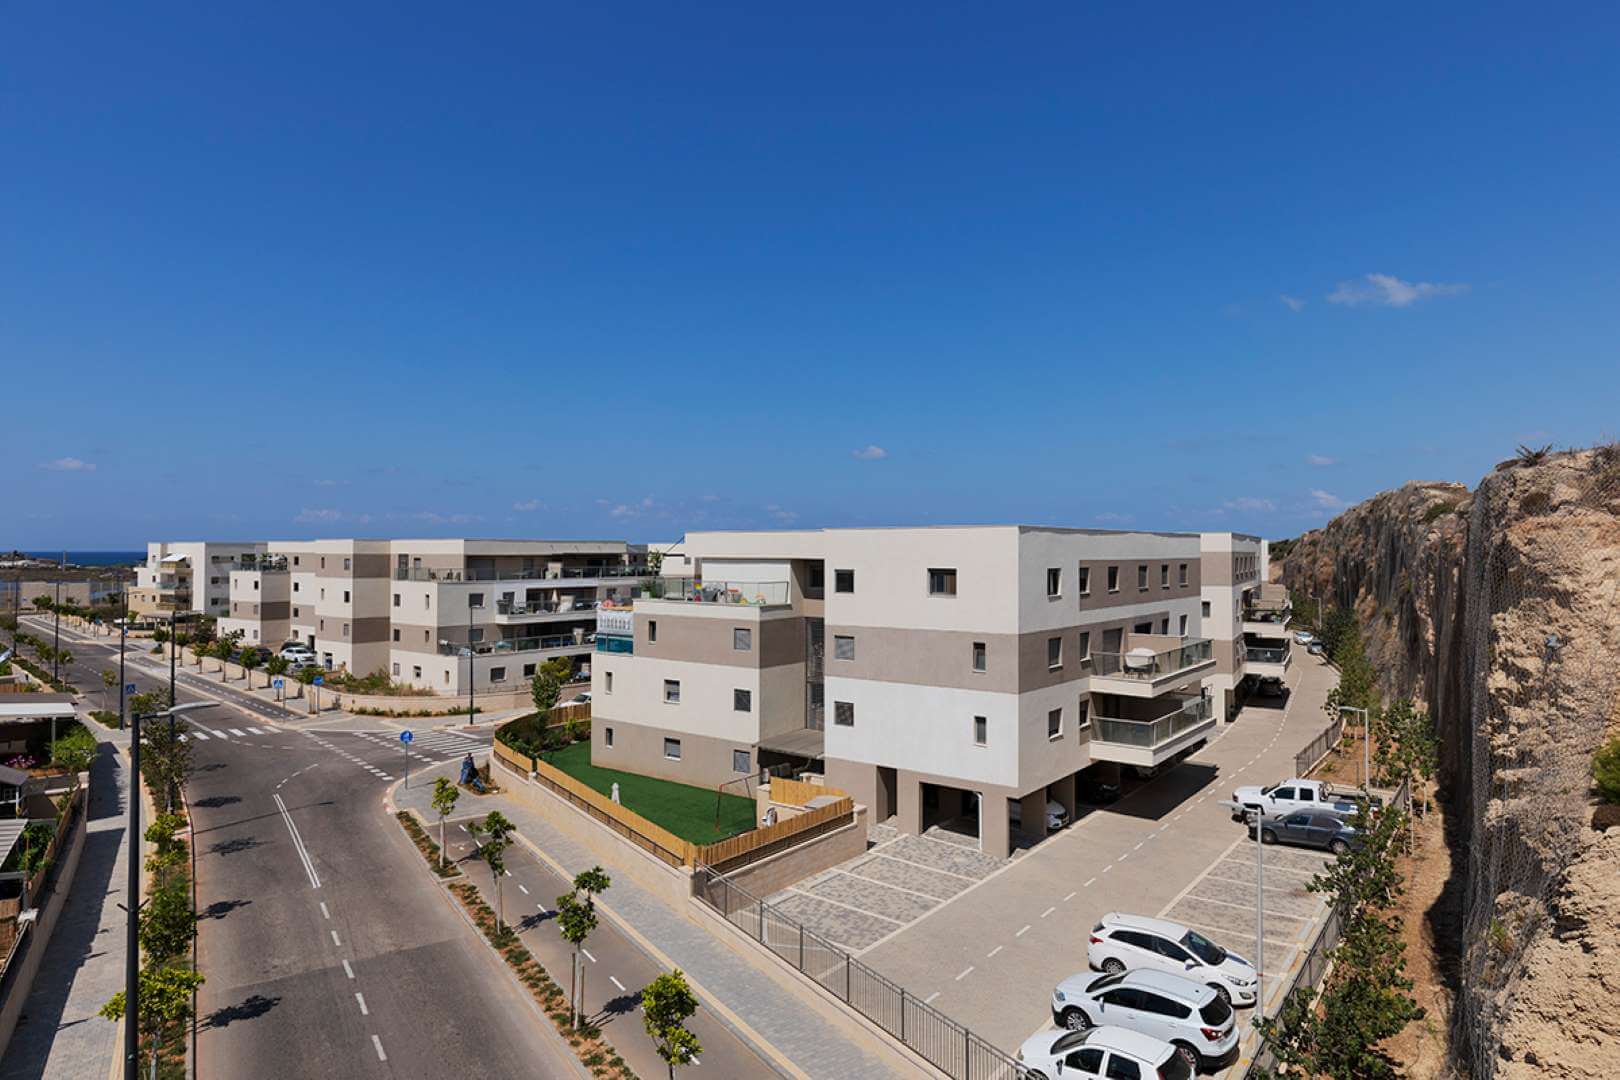 Photograph of buildings from the UNIK&MORE project in Atlit